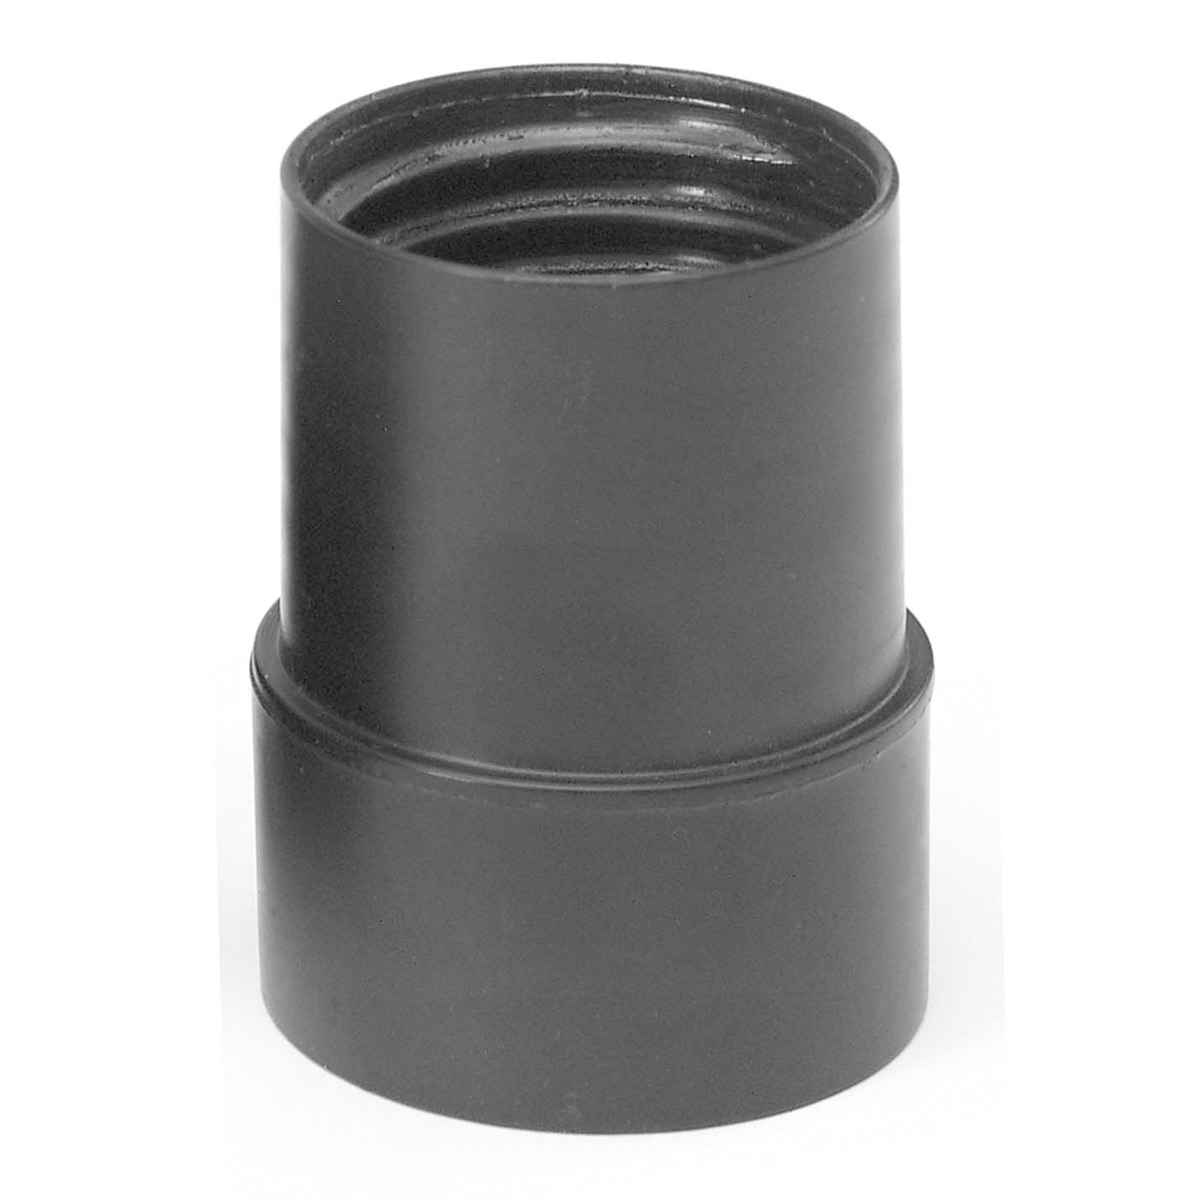 MR. NOZZLE WET/DRY VAC TANK ADAPTER 1-1/2 HOSE TO 2-1/4 I.D.